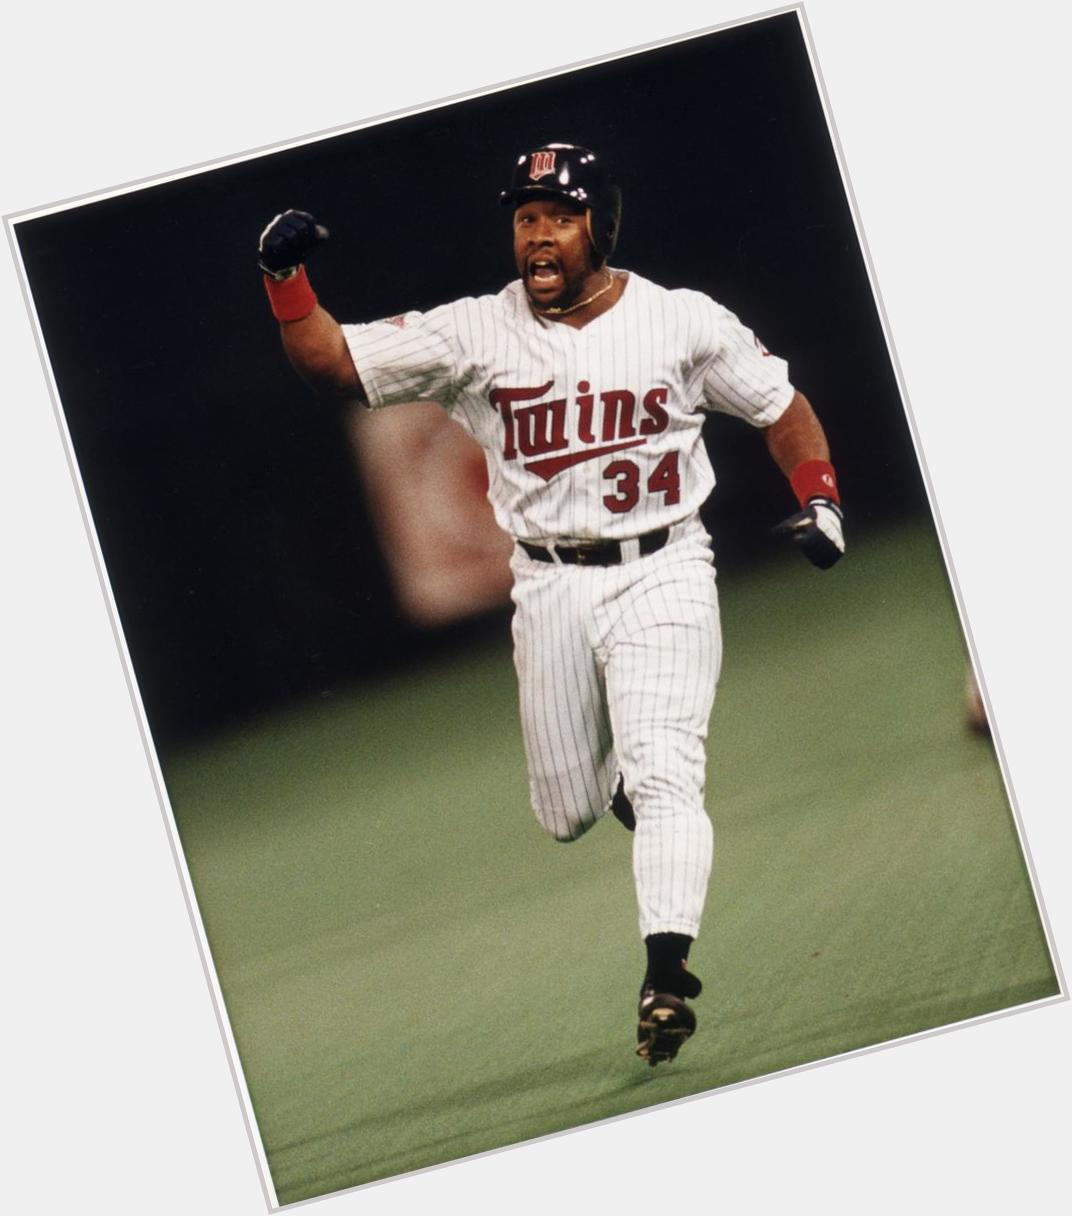 Happy birthday to one of the greats! You are truly missed Kirby Puckett. 